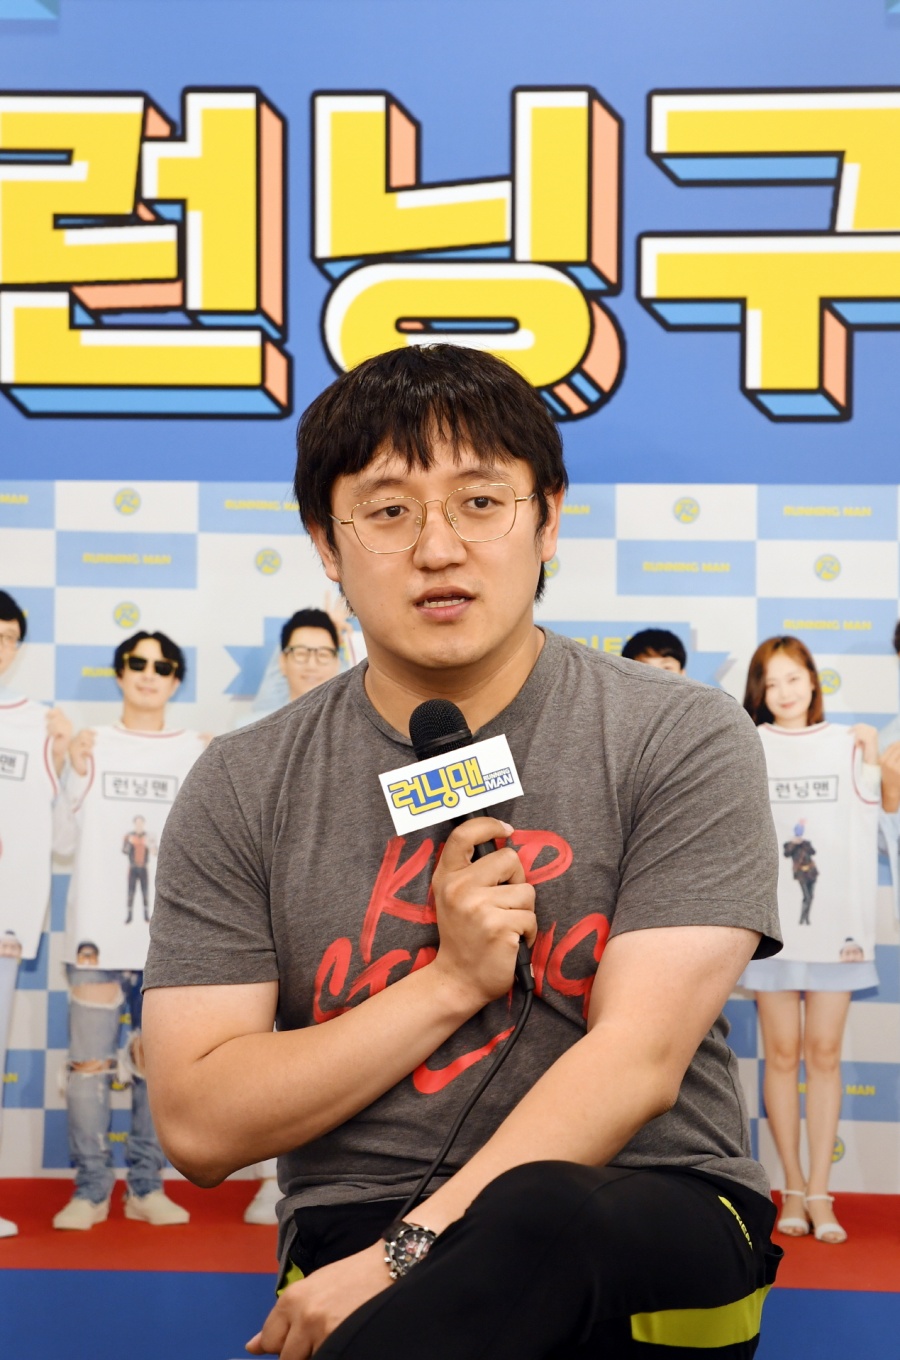 Jung Chul-min PD summarized the meaning of Running Man nine-year anniversary.Running Man is an entertainment program representing SBS.Running Man, which started broadcasting on July 11, 2010, was just nine-year anniversary.It is not easy for an entertainment program to meet viewers steadily for nearly 10 years.The power of Running Man Nine-year anniversary comes from format.Running Man, which received explosive love from domestic viewers, was officially remade in China, Vietnam and other countries.Members such as Yoo Jae-Suk, Lee Kwang-soo, Song Ji-hyo, and Ji Suk-jin, who have been keeping Running Man for nine years, are also popular in Idol class overseas, such as fan meeting tours with the popularity of the program.Running Man recently opened a Nine-year anniversary fan meeting Running District to meet domestic and foreign viewers at the Nine-year anniversary.In the case of Running Man, it has already been going on fan meeting tours overseas for many years, but it is unusual for the entertainment program to hold a solo fan meeting in Korea.Jung Chul-min PD said, I thought that it seemed to share the time of family while watching the members meet by taking private time for overseas fan meeting.I thought that if I got closer to the Nine-year anniversary, I would like to be more honest.  There is no program that passed the Nine-year anniversary in SBS entertainment history.I asked the members to understand that the program does not know tomorrow, I can not guarantee anyones work, so I think it would be good to do it now. He explained why he opened a fan meeting at Nine-year anniversary, not the 10th anniversary.Running Man, which has been in the spotlight for nearly 10 years, is still growing and worrying. Jung Chul-min PD said, Running Man is a program that started with Game Variety.I feel a lot of limitations in scalability.I think that Running Man is very different from the early days. In the past, it was mainly about storytelling such as superpowers. There were many good things, but it is also true that Chodding Man image was created at some point.I tried to solve it, but even after I directed it, Running Man still hears negative and positive stories. Jung Chul-min PD, who has made various attempts such as recruiting new members, changing formats, and holding fan meeting for change, said, I will try to dissolve Running Manliness and Running Manliness by finding variety items that I can do.Running Manliness is for existing viewers, and Running Man is not like is for viewers who have not seen Running Man before. We are still preparing a new project.I think that if I can not do it anymore, I think that young juniors will be able to add new colors to Running Man. Jung Chul-min PD cited the character and self-management of the members as the power to lead the Nine-year anniversary of Running Man.Jung PD said, The Running Man members do not buy and value the fans.They are really good people, he said. Members character, personality, and self-management are the power of Running Man. They are good and humanly good people. I also thanked Yoo Jae-Suk, who took the center of Running Man.Jung Chul-min PD said, Yoo Jae-Suk has already been a star entertainer since I was an aspiring PD.When I was in charge of the main PD in the young year, I would have had doubts about me, but I always helped and led me. He pointed out that I could not see it, and gave me sincere advice and worries.On the contrary, I would like to cheer you up if I want to finish it. He thanked Yoo Jae-Suk who believed in him.I sometimes talk about being a fool who knows only broadcasting, but I have a better idea about broadcasting than a lot of PD seniors.As a top MC, the philosophy of entertainment is clear, he said. It is like Alachua County, which is indispensable to me, both private and public.It seems good to have Alachua County, which can talk about broadcasting as a broadcaster, and it is also a brother who has a lot of affection and concern for Running Man. Running Man will broadcast Running Man Nine-year anniversary special for three weeks starting from 8th.In this broadcast, Running Man fan meeting scene will be released.=